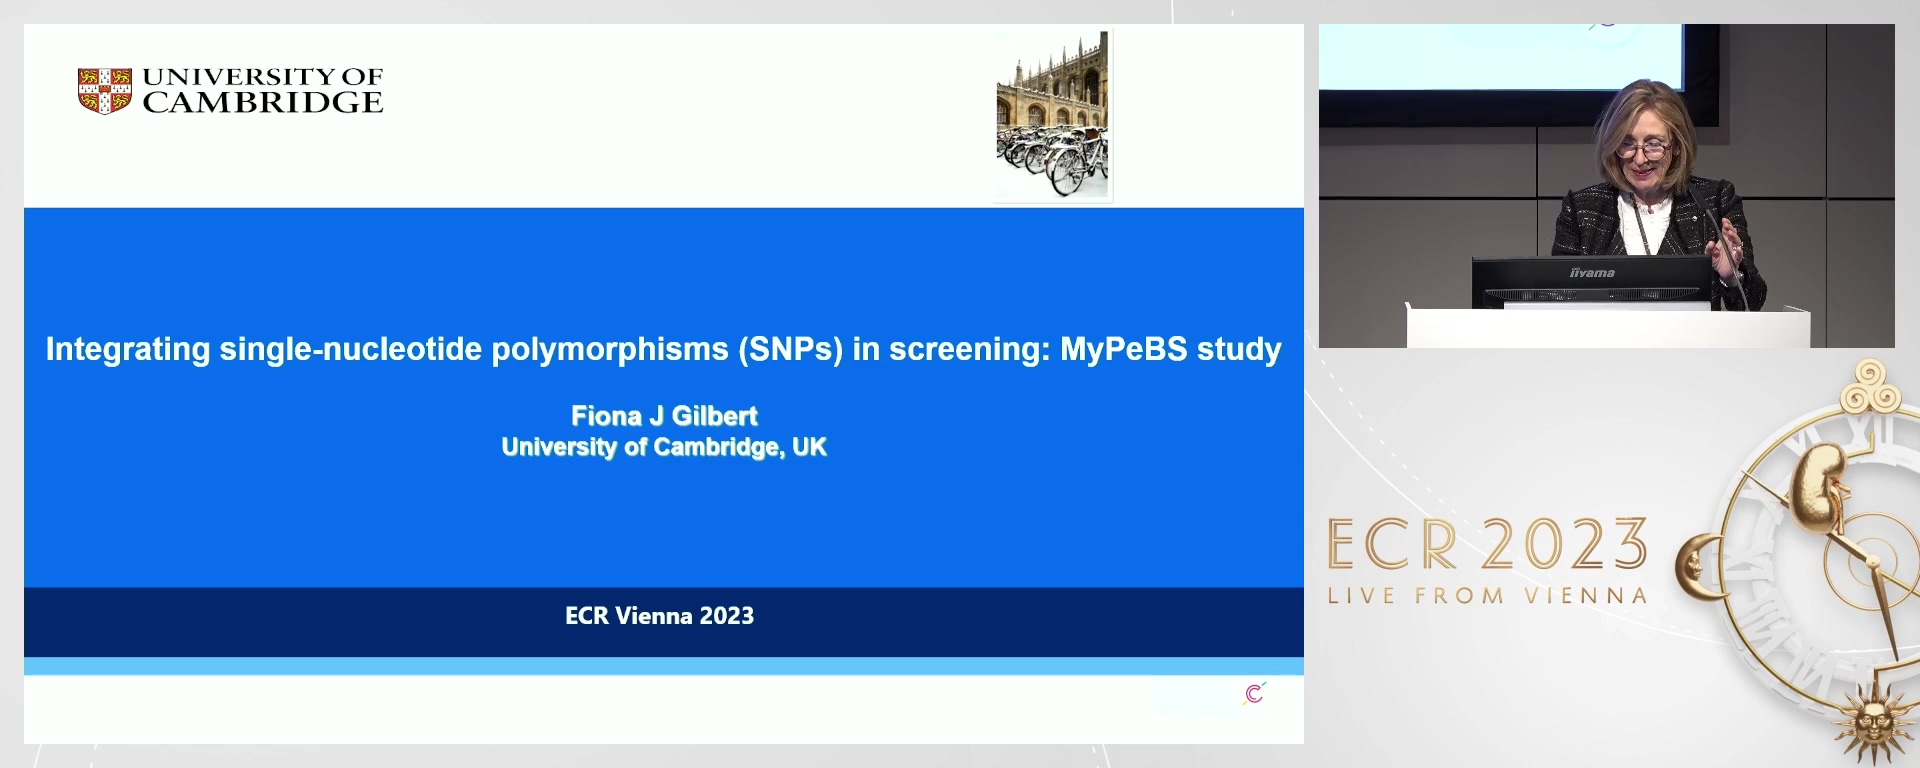 Integrating single-nucleotide polymorphisms (SNP) in screening: MyPeBS study